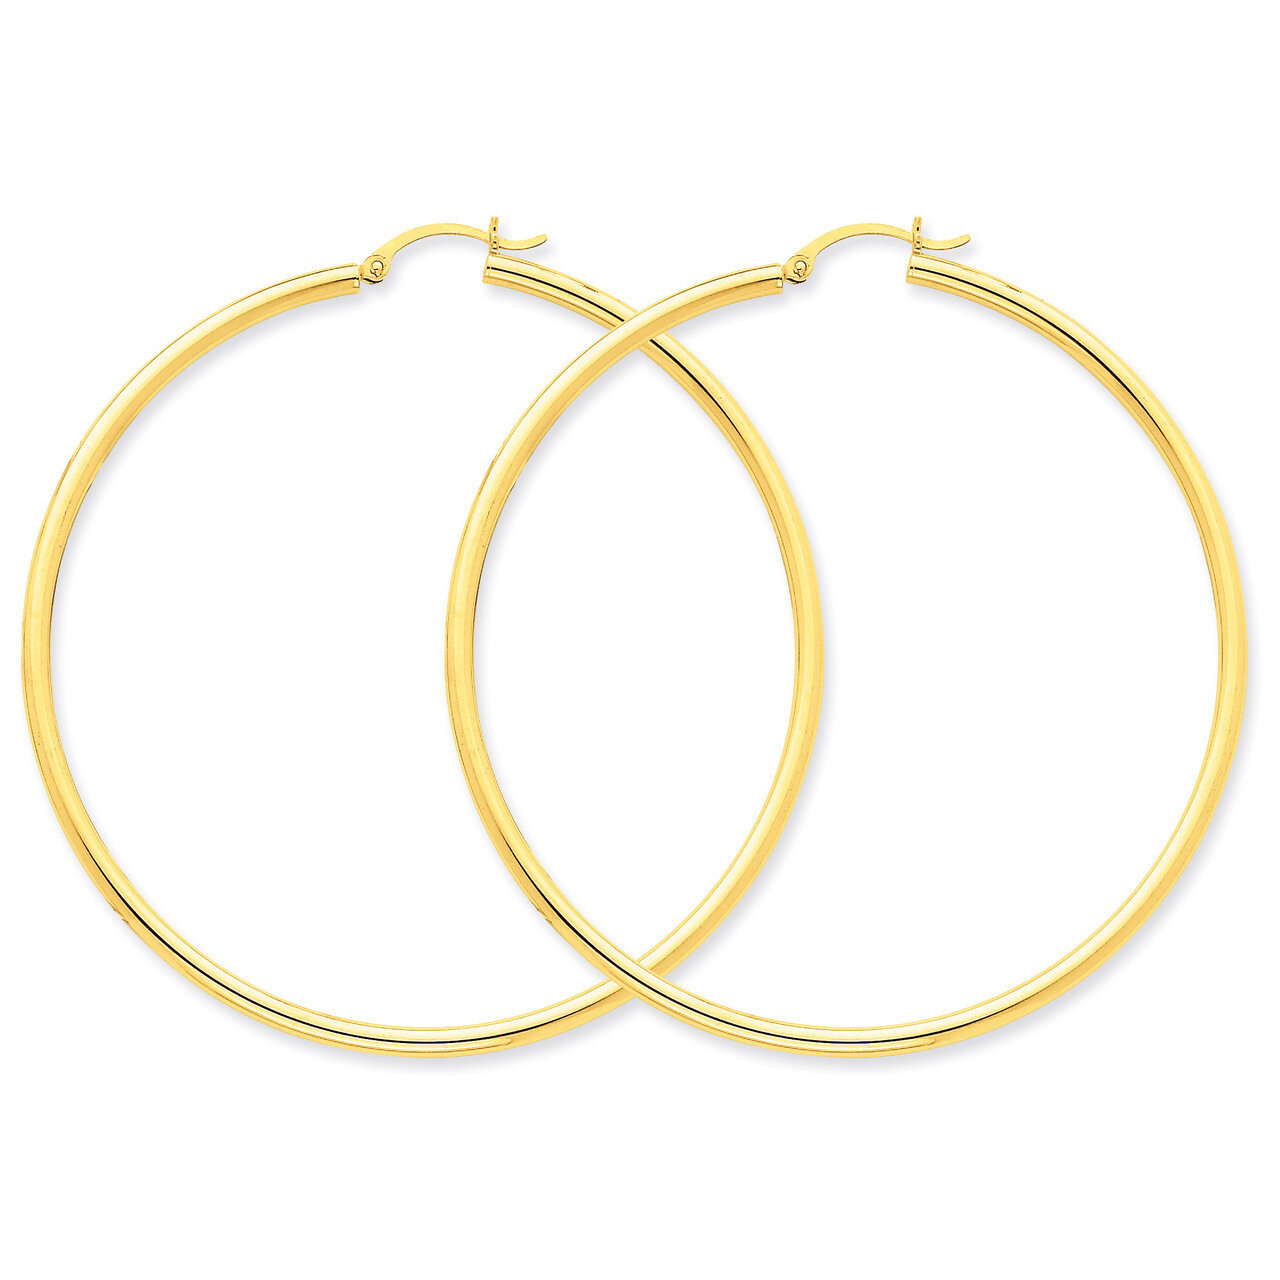 Polished 2.5mm Round Hoop Earrings 10k Gold 10T930